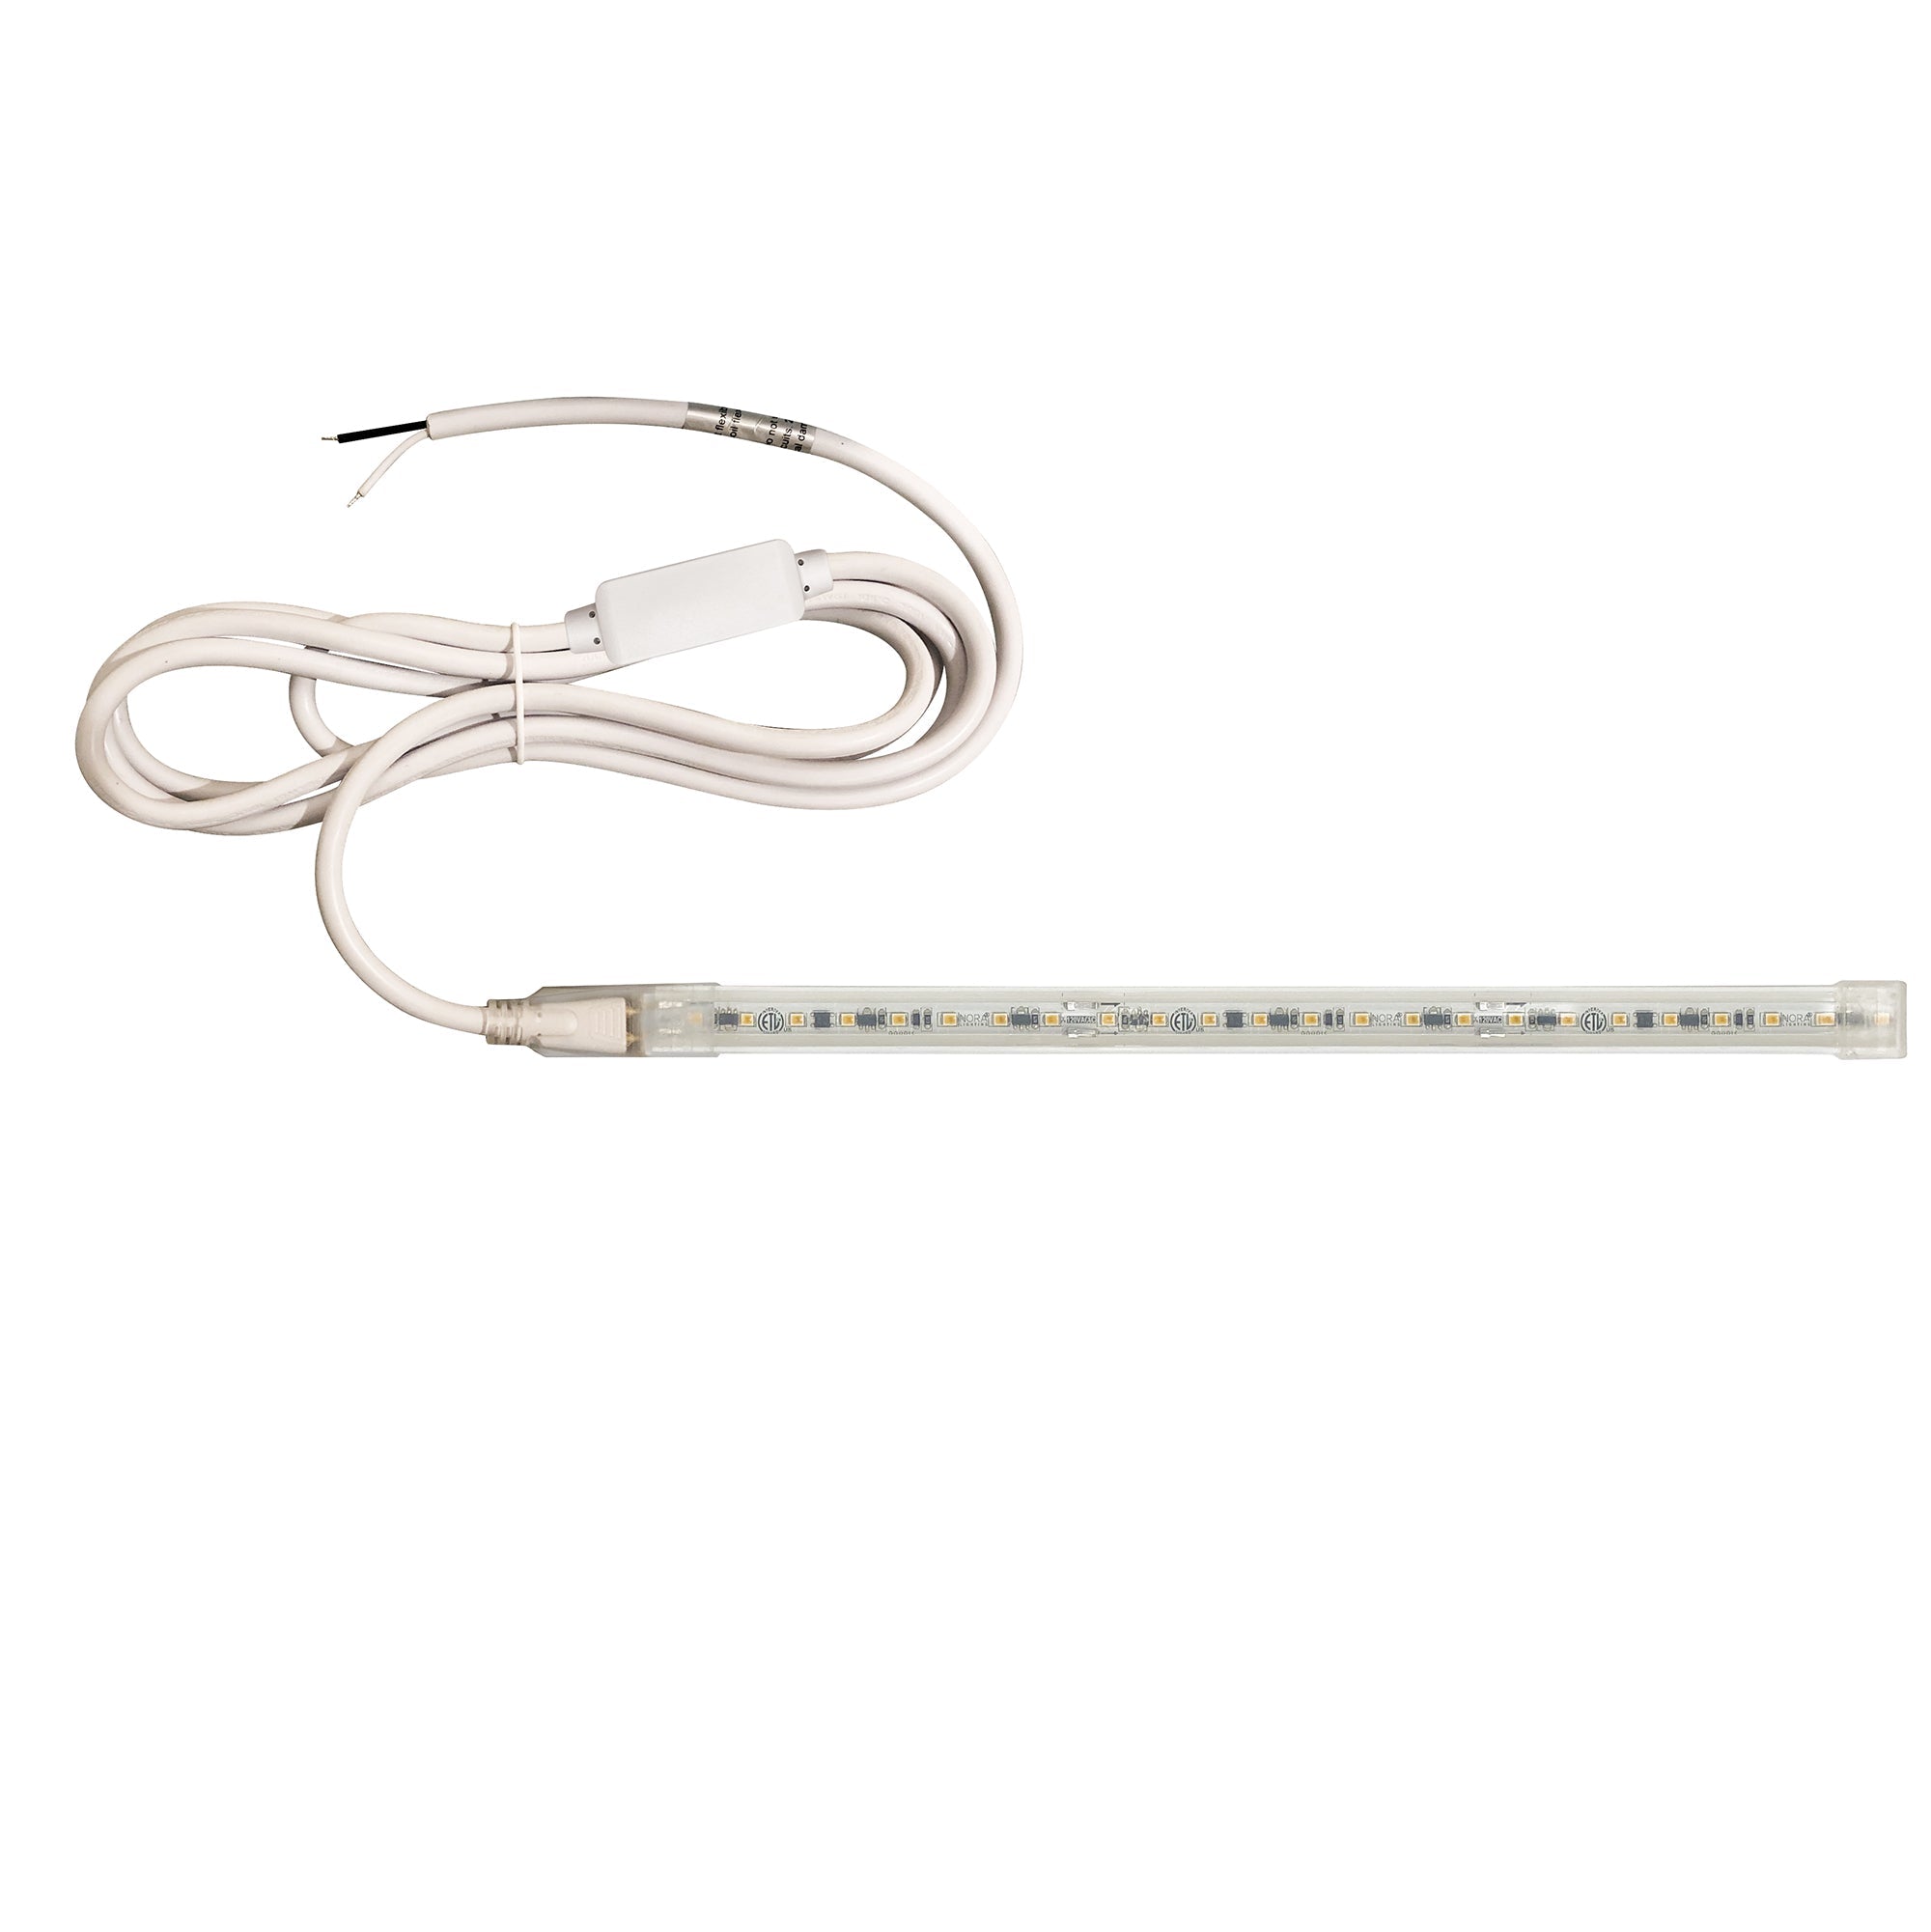 Nora Lighting NUTP13-W66-8-12-930/HWSP - Accent / Undercabinet - Custom Cut 66-ft, 8-in 120V Continuous LED Tape Light, 330lm / 3.6W per foot, 3000K, w/ Mounting Clips and 8' Hardwired Power Cord w/ Surge Protector